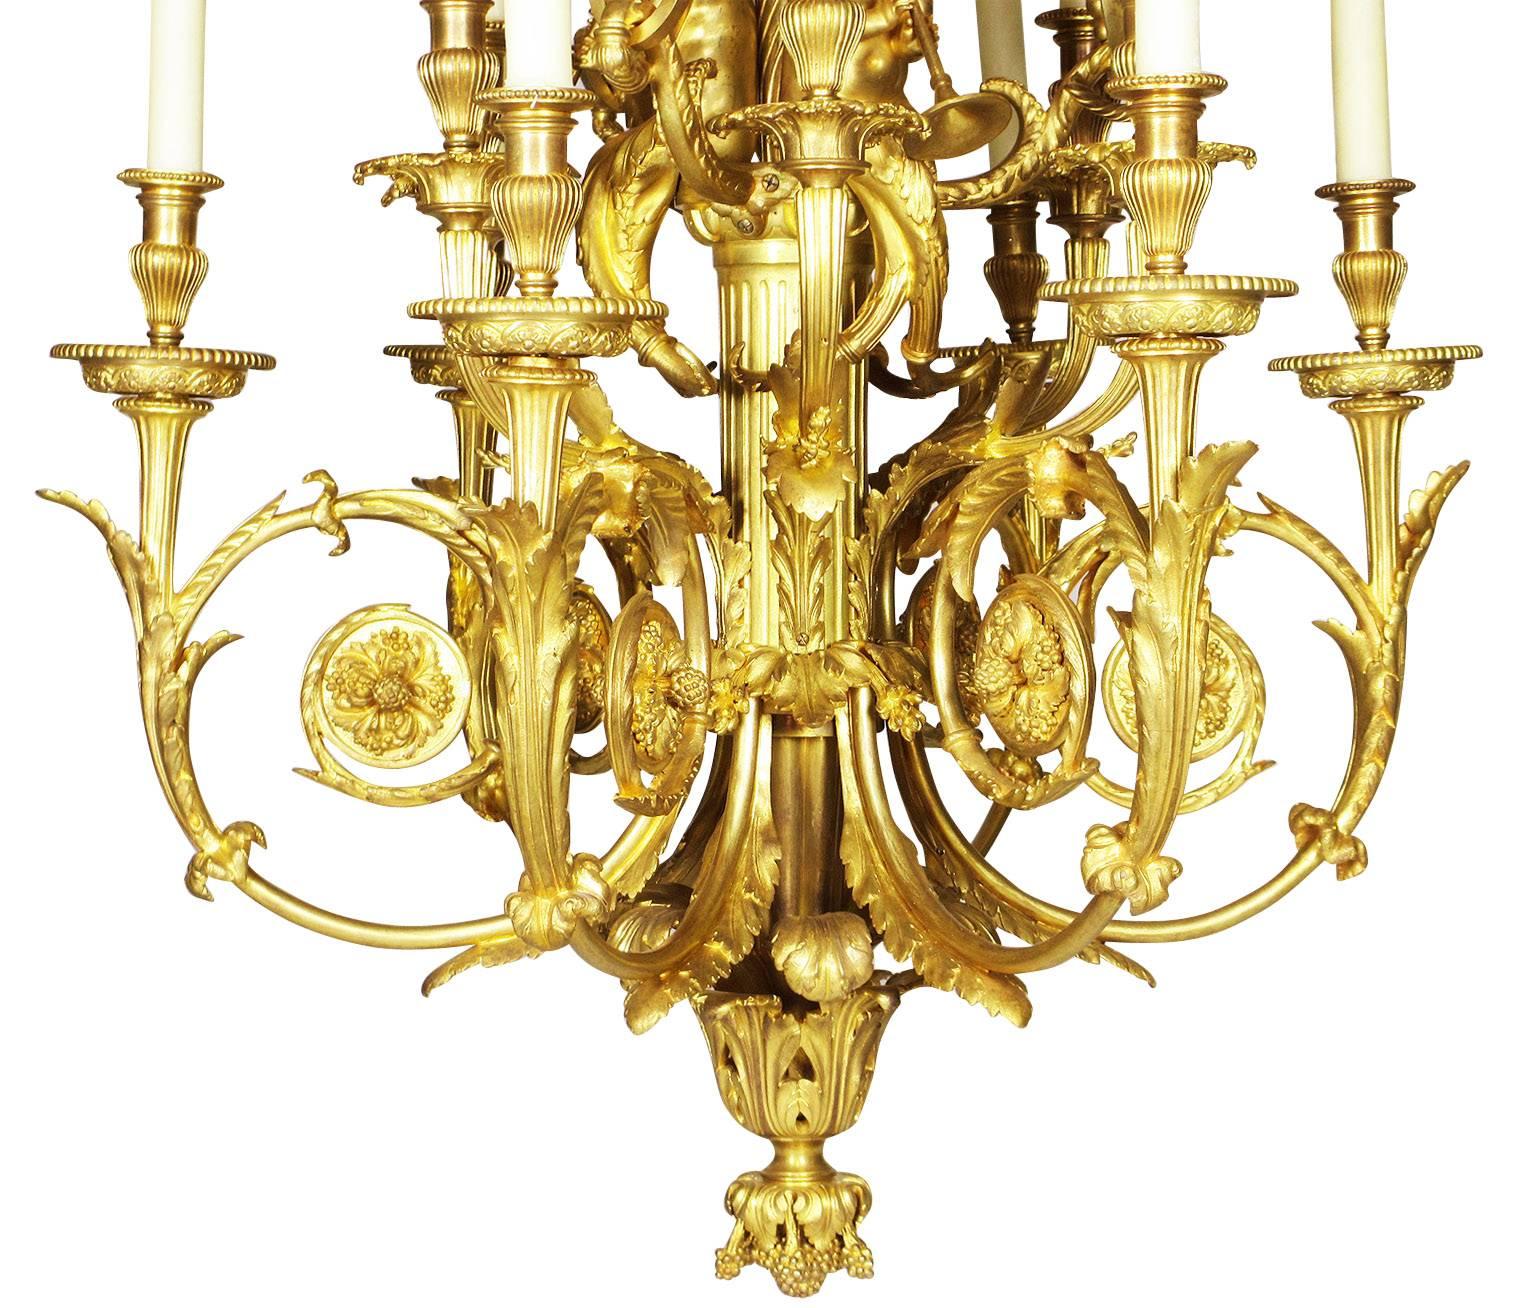 A palatial and superb quality French, 19th century Louis XVI style ormolu figural six-light chandelier with figures of cherubs, after the model by Pierre Gouthiere in the cabinet doré for Marie-Antoinette at the royal palace of Versailles. The